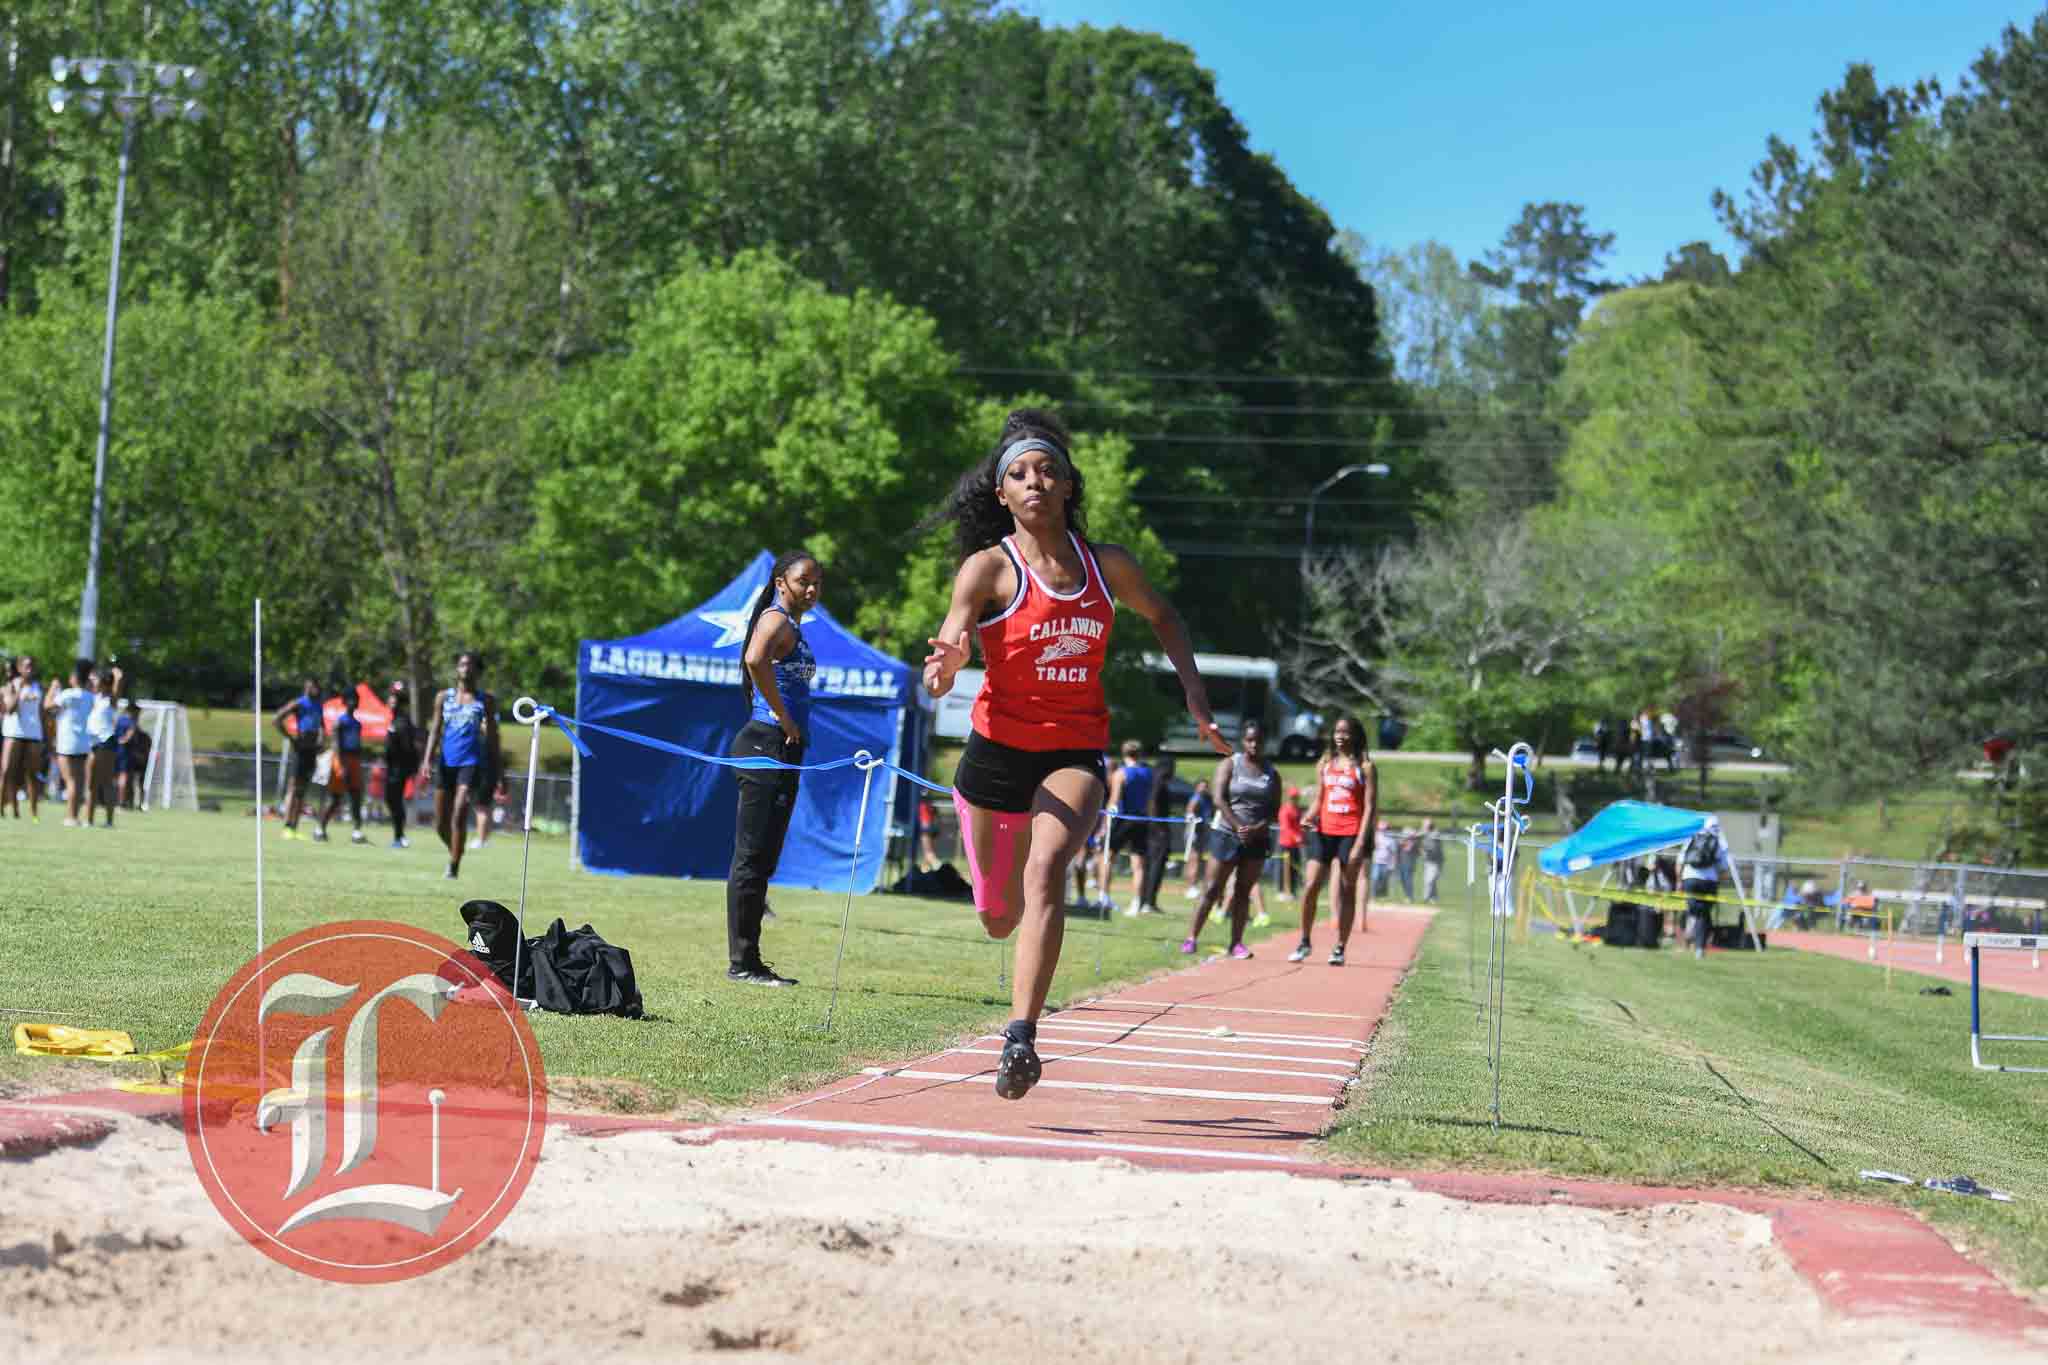 PHOTOS The LaGrange Toyota Invitational track meet brings out